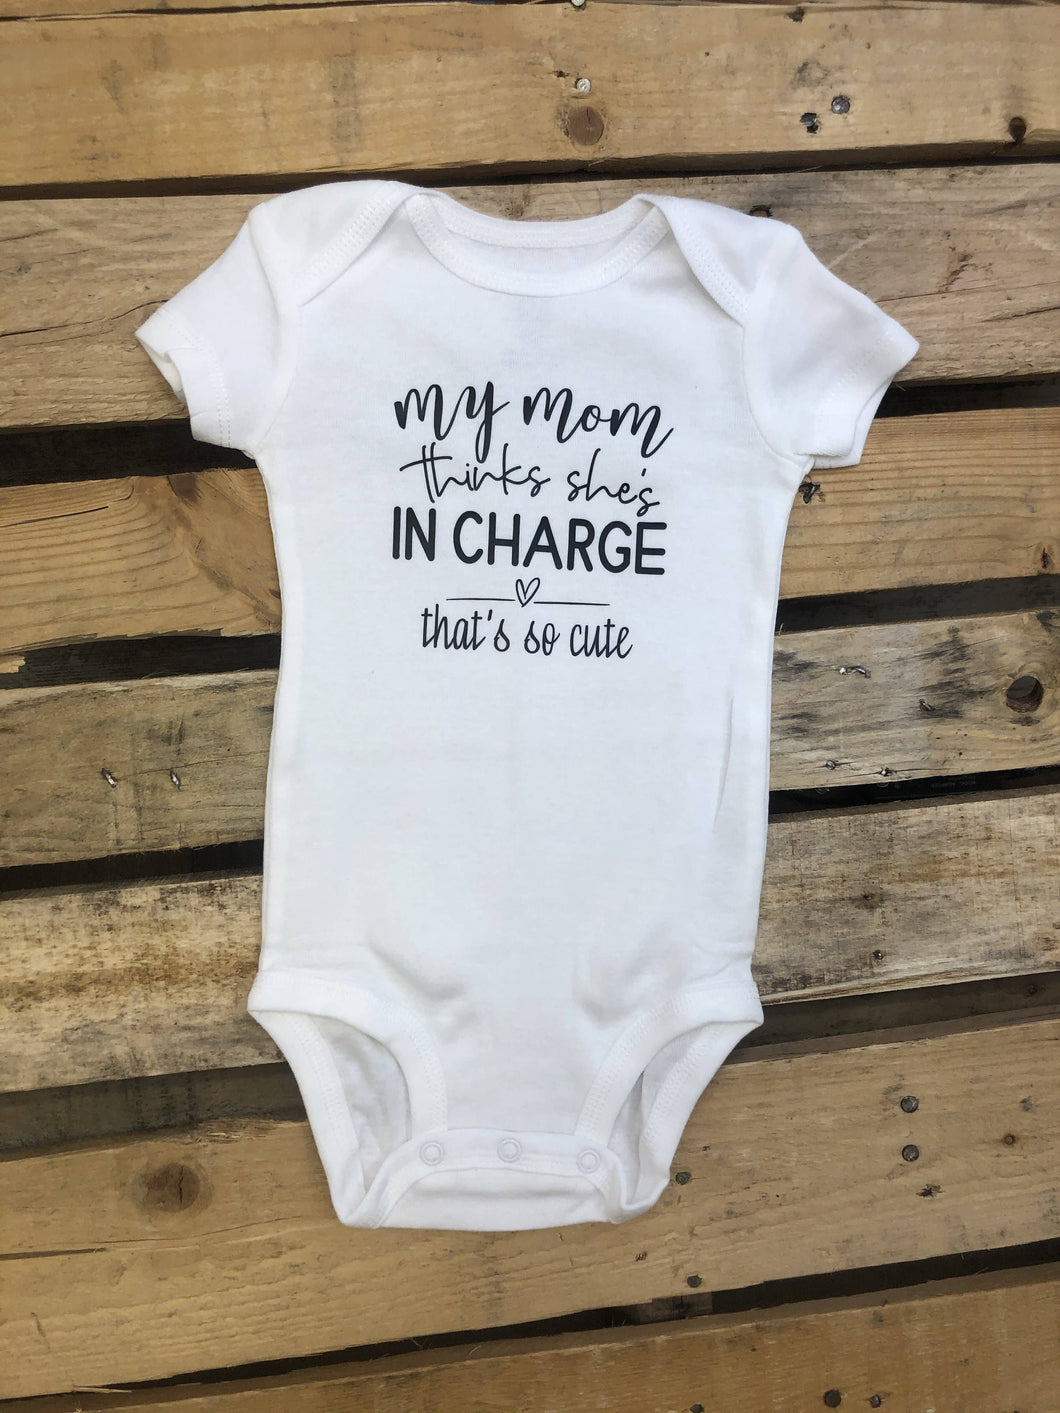 Jena Bug Baby Boutique - My Mom Thinks She's in Charge, That's so Cute Infant Bodysui